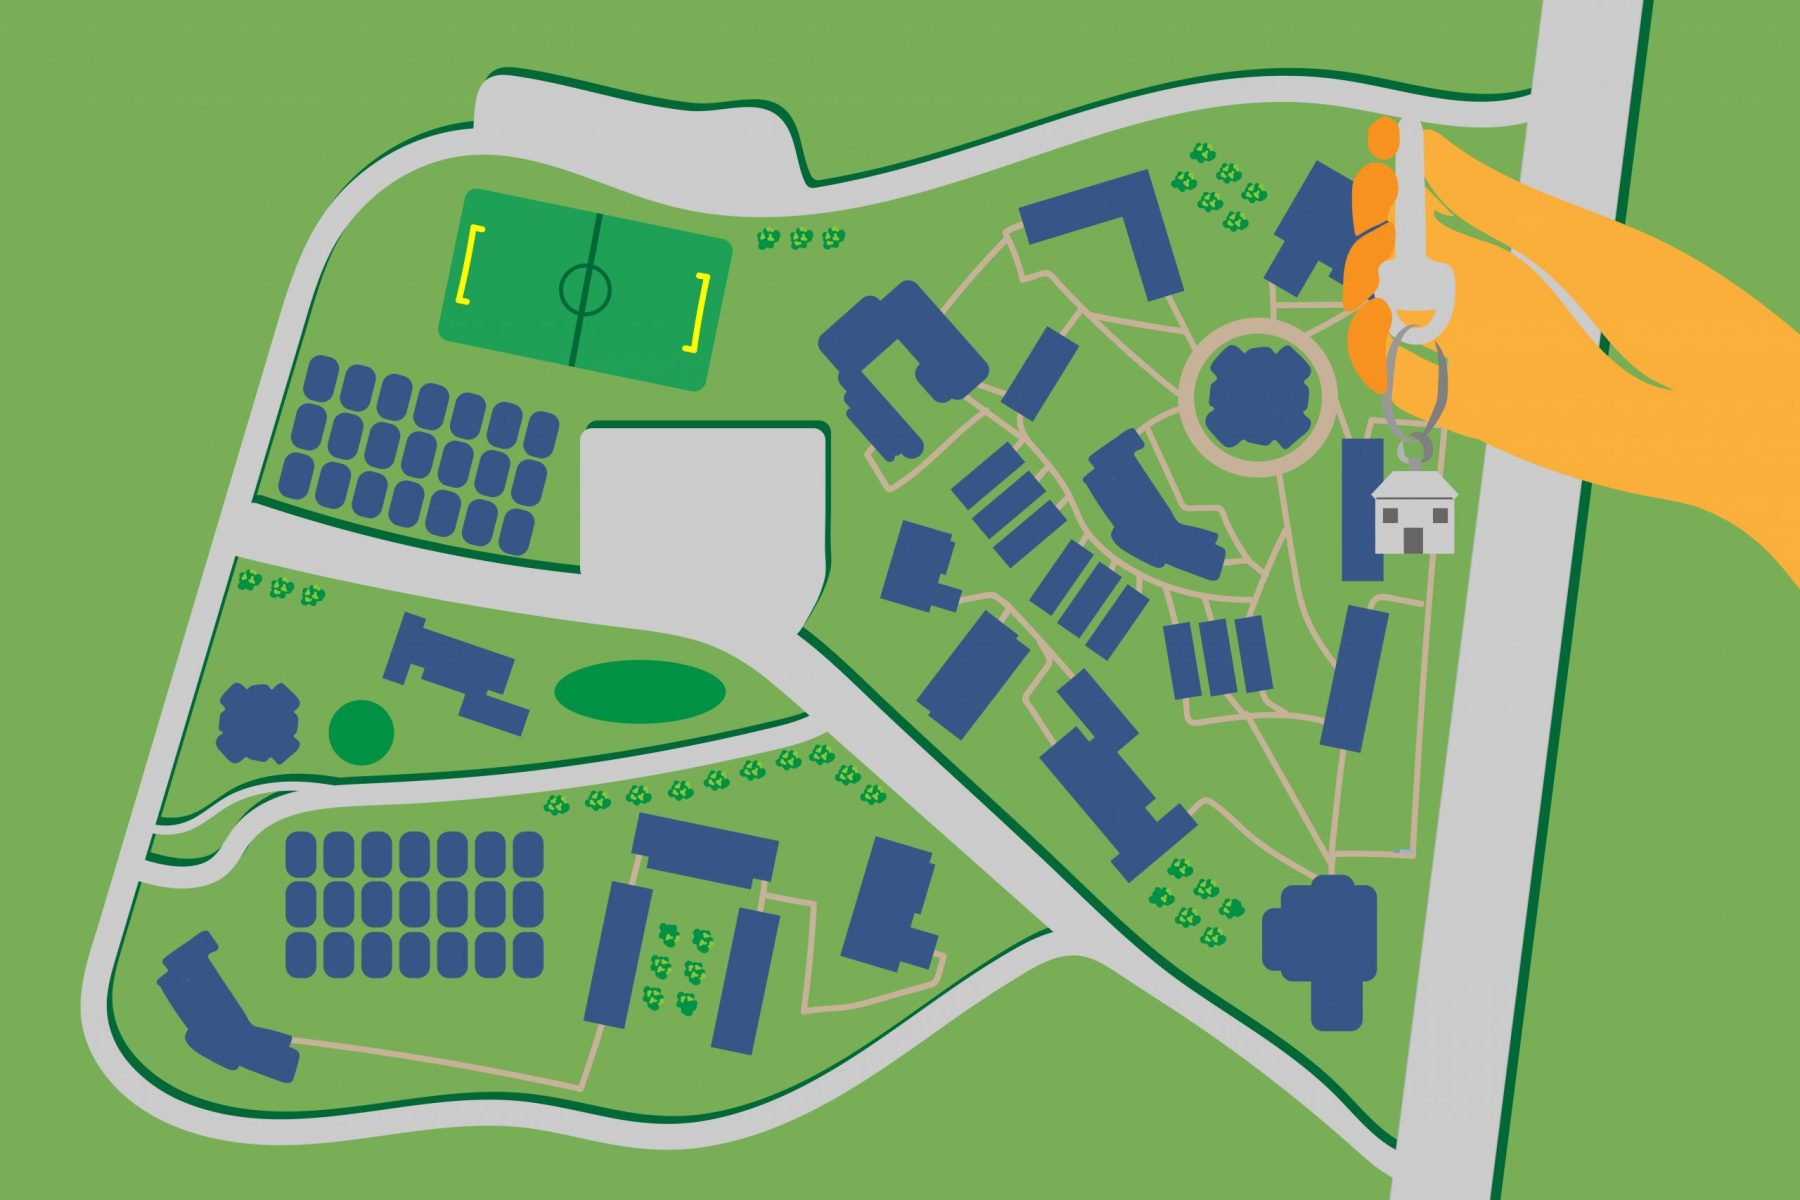 An illustration of a college campus and its relation to students renting apartments